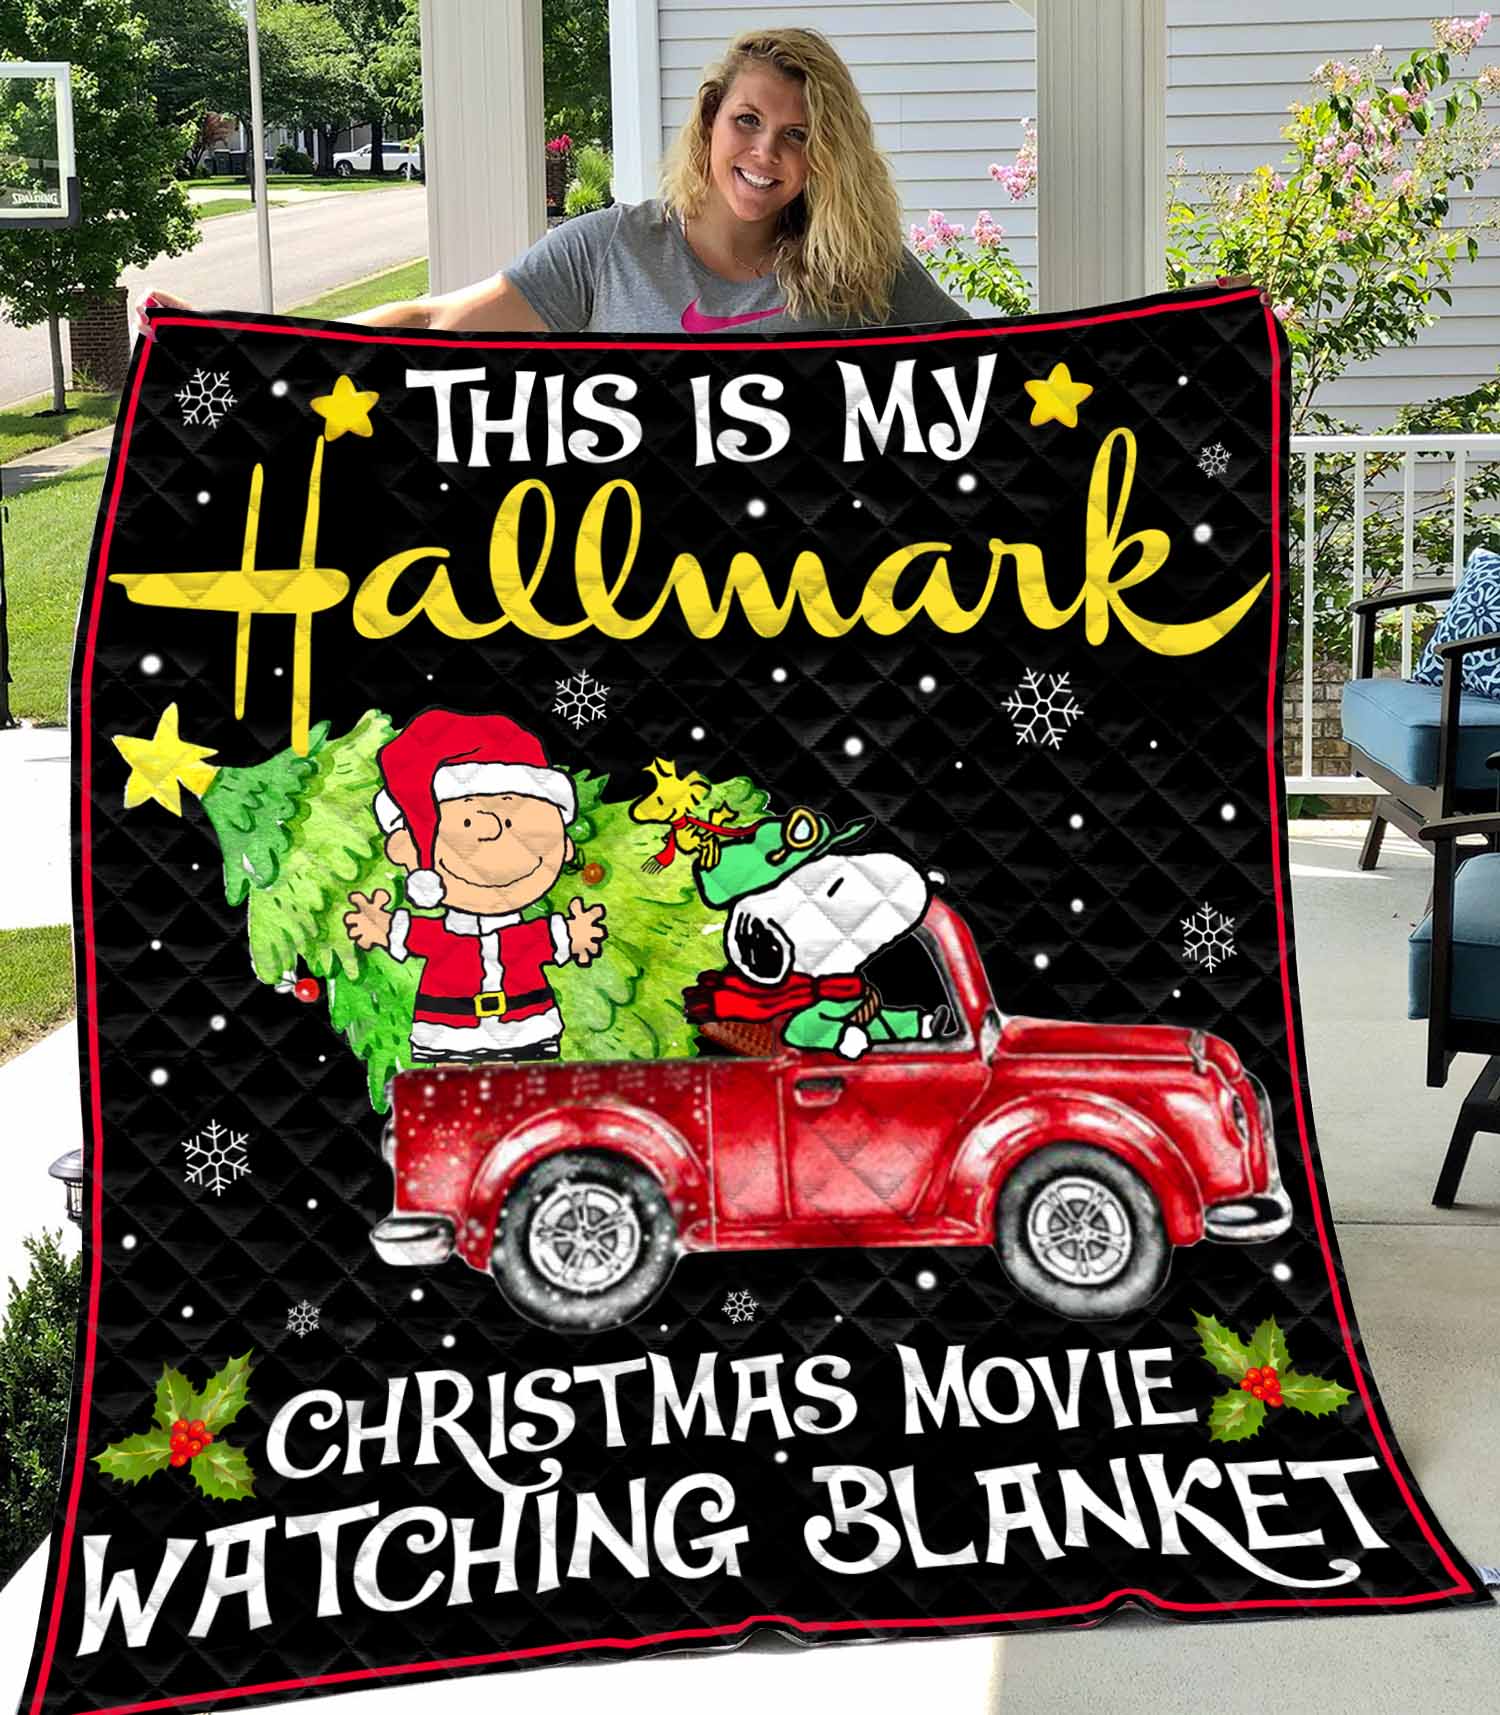 Snoopy Charlie This is my hallmark Christmas movie watching blanket – LIMITED EDITION